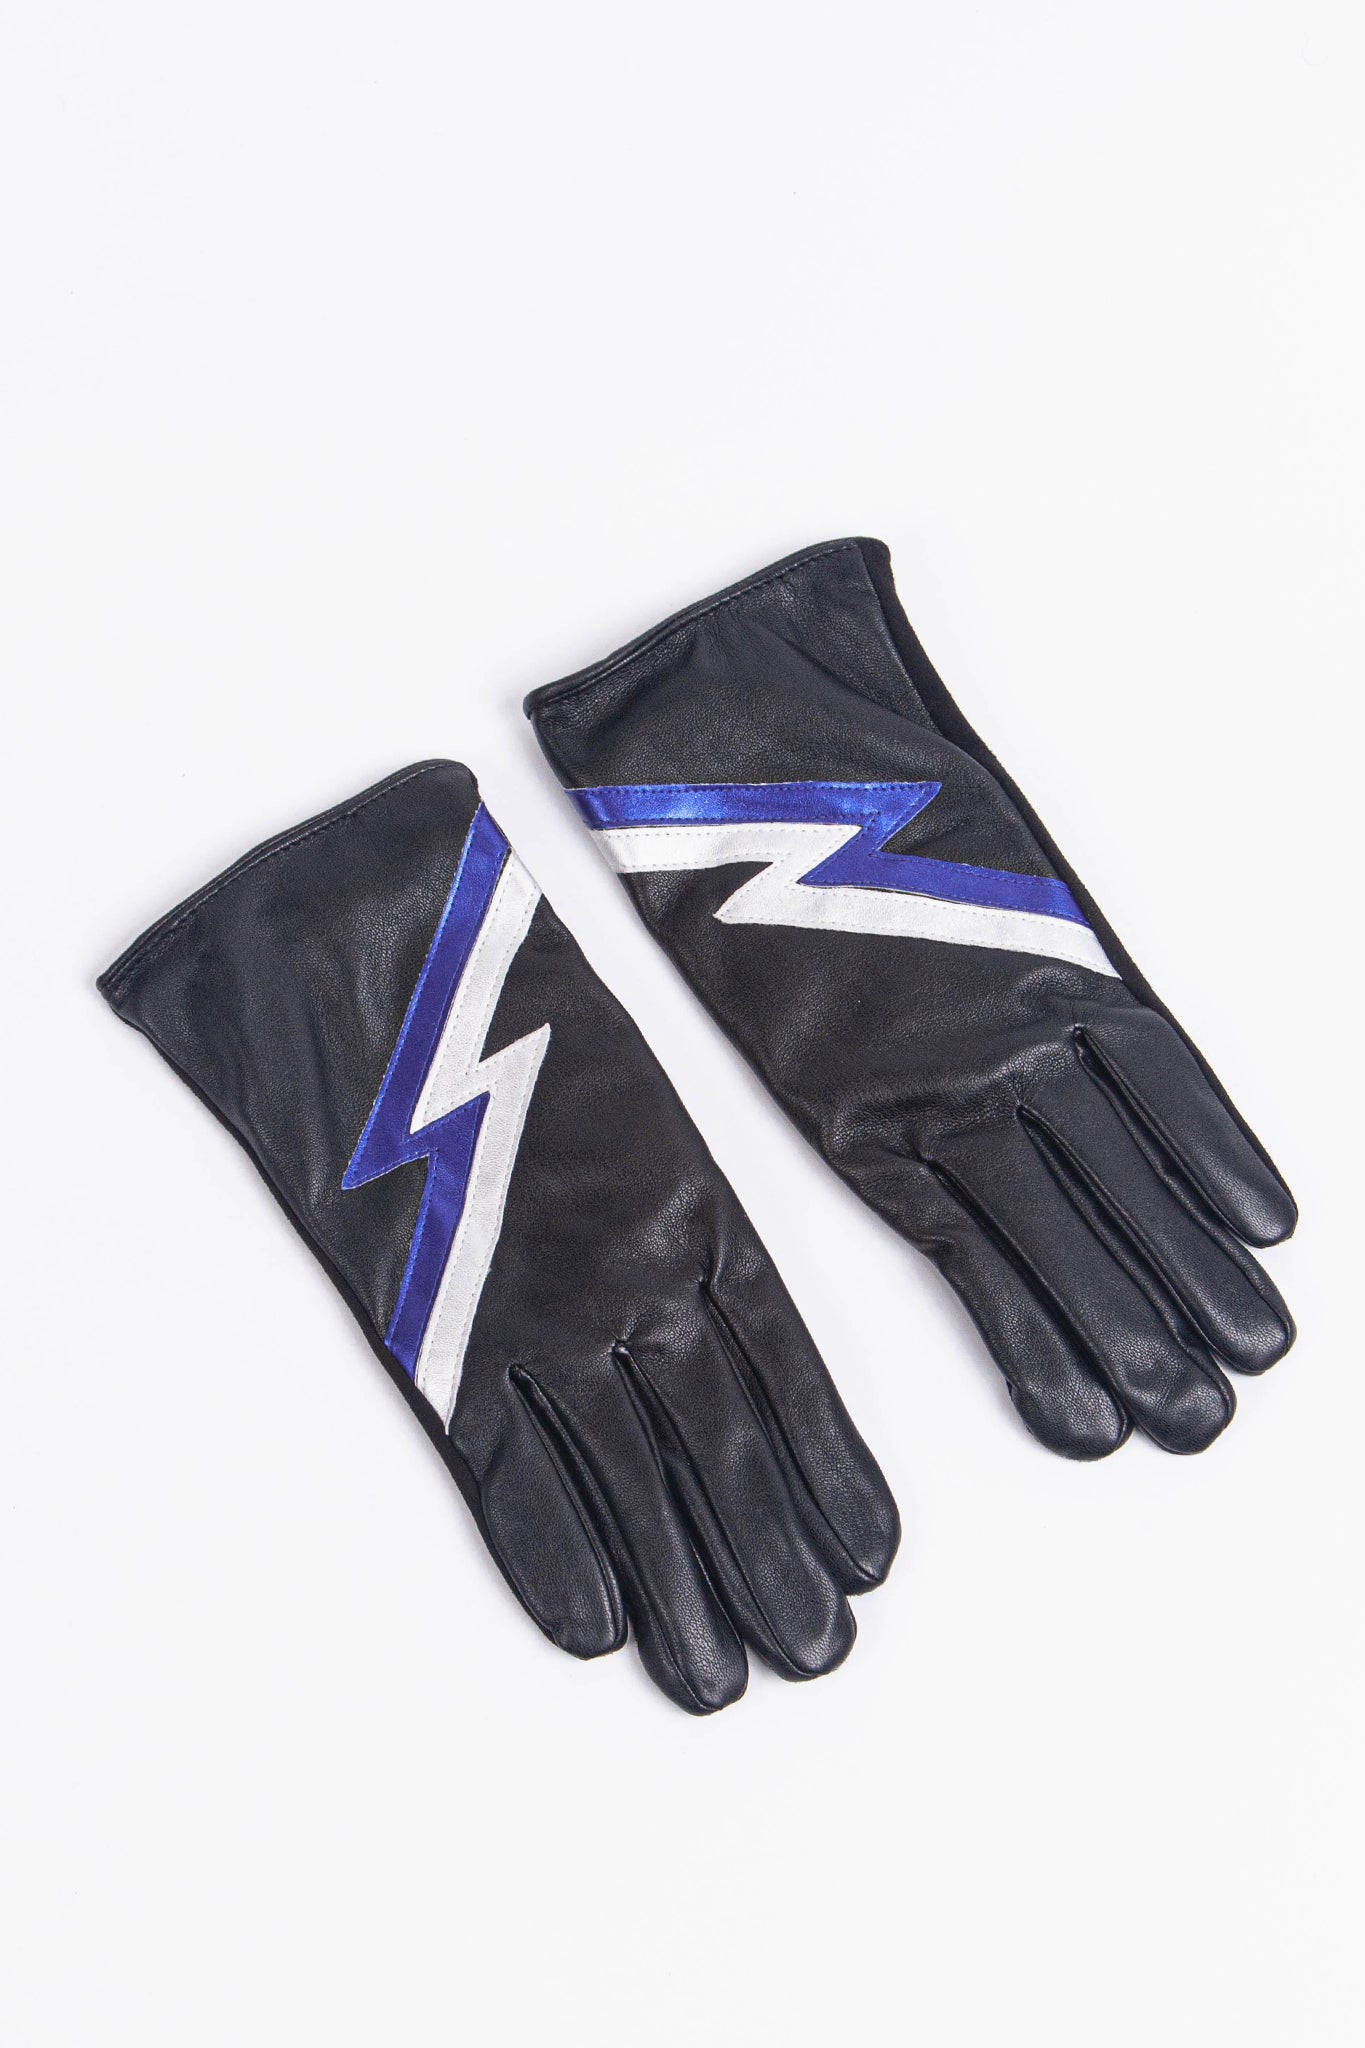 black vegan leather gloves with a metallic sheen and a blue and white lighting bolt pattern